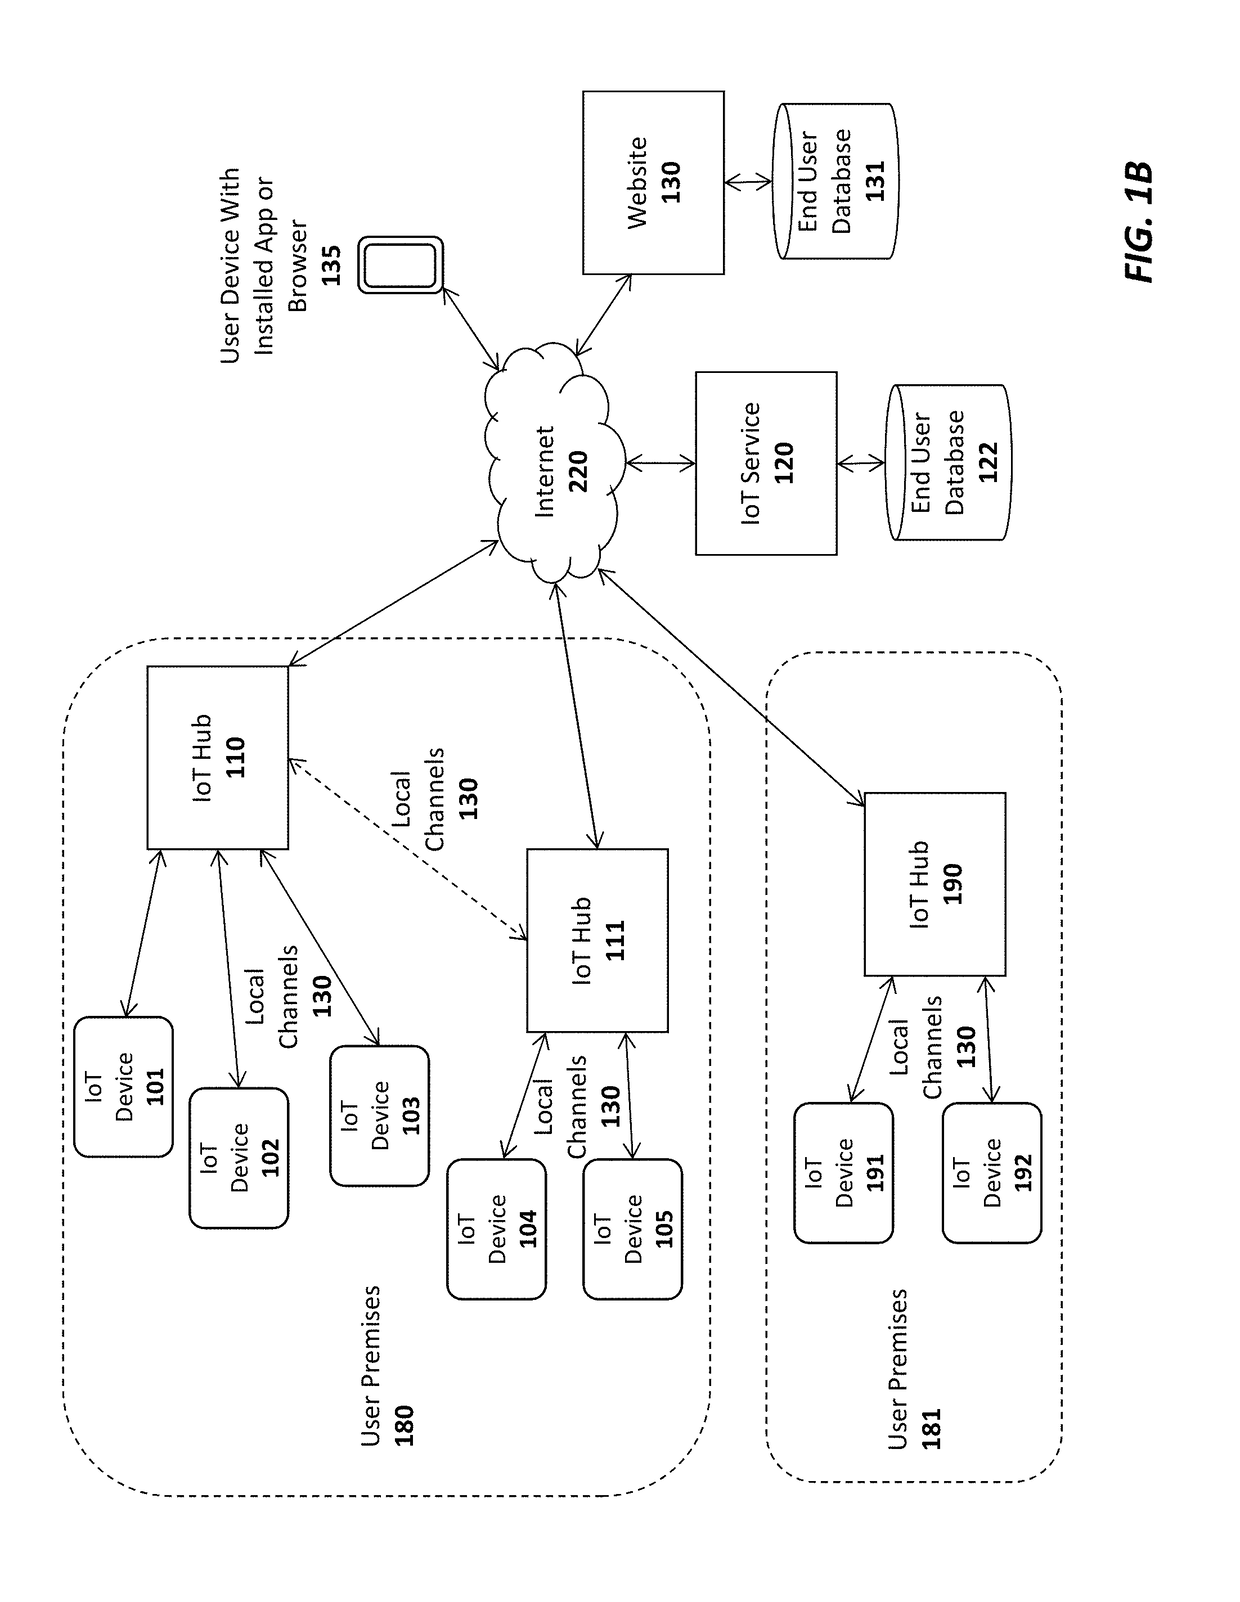 System and method for automatic wireless network authentication in an internet of things (IOT) system